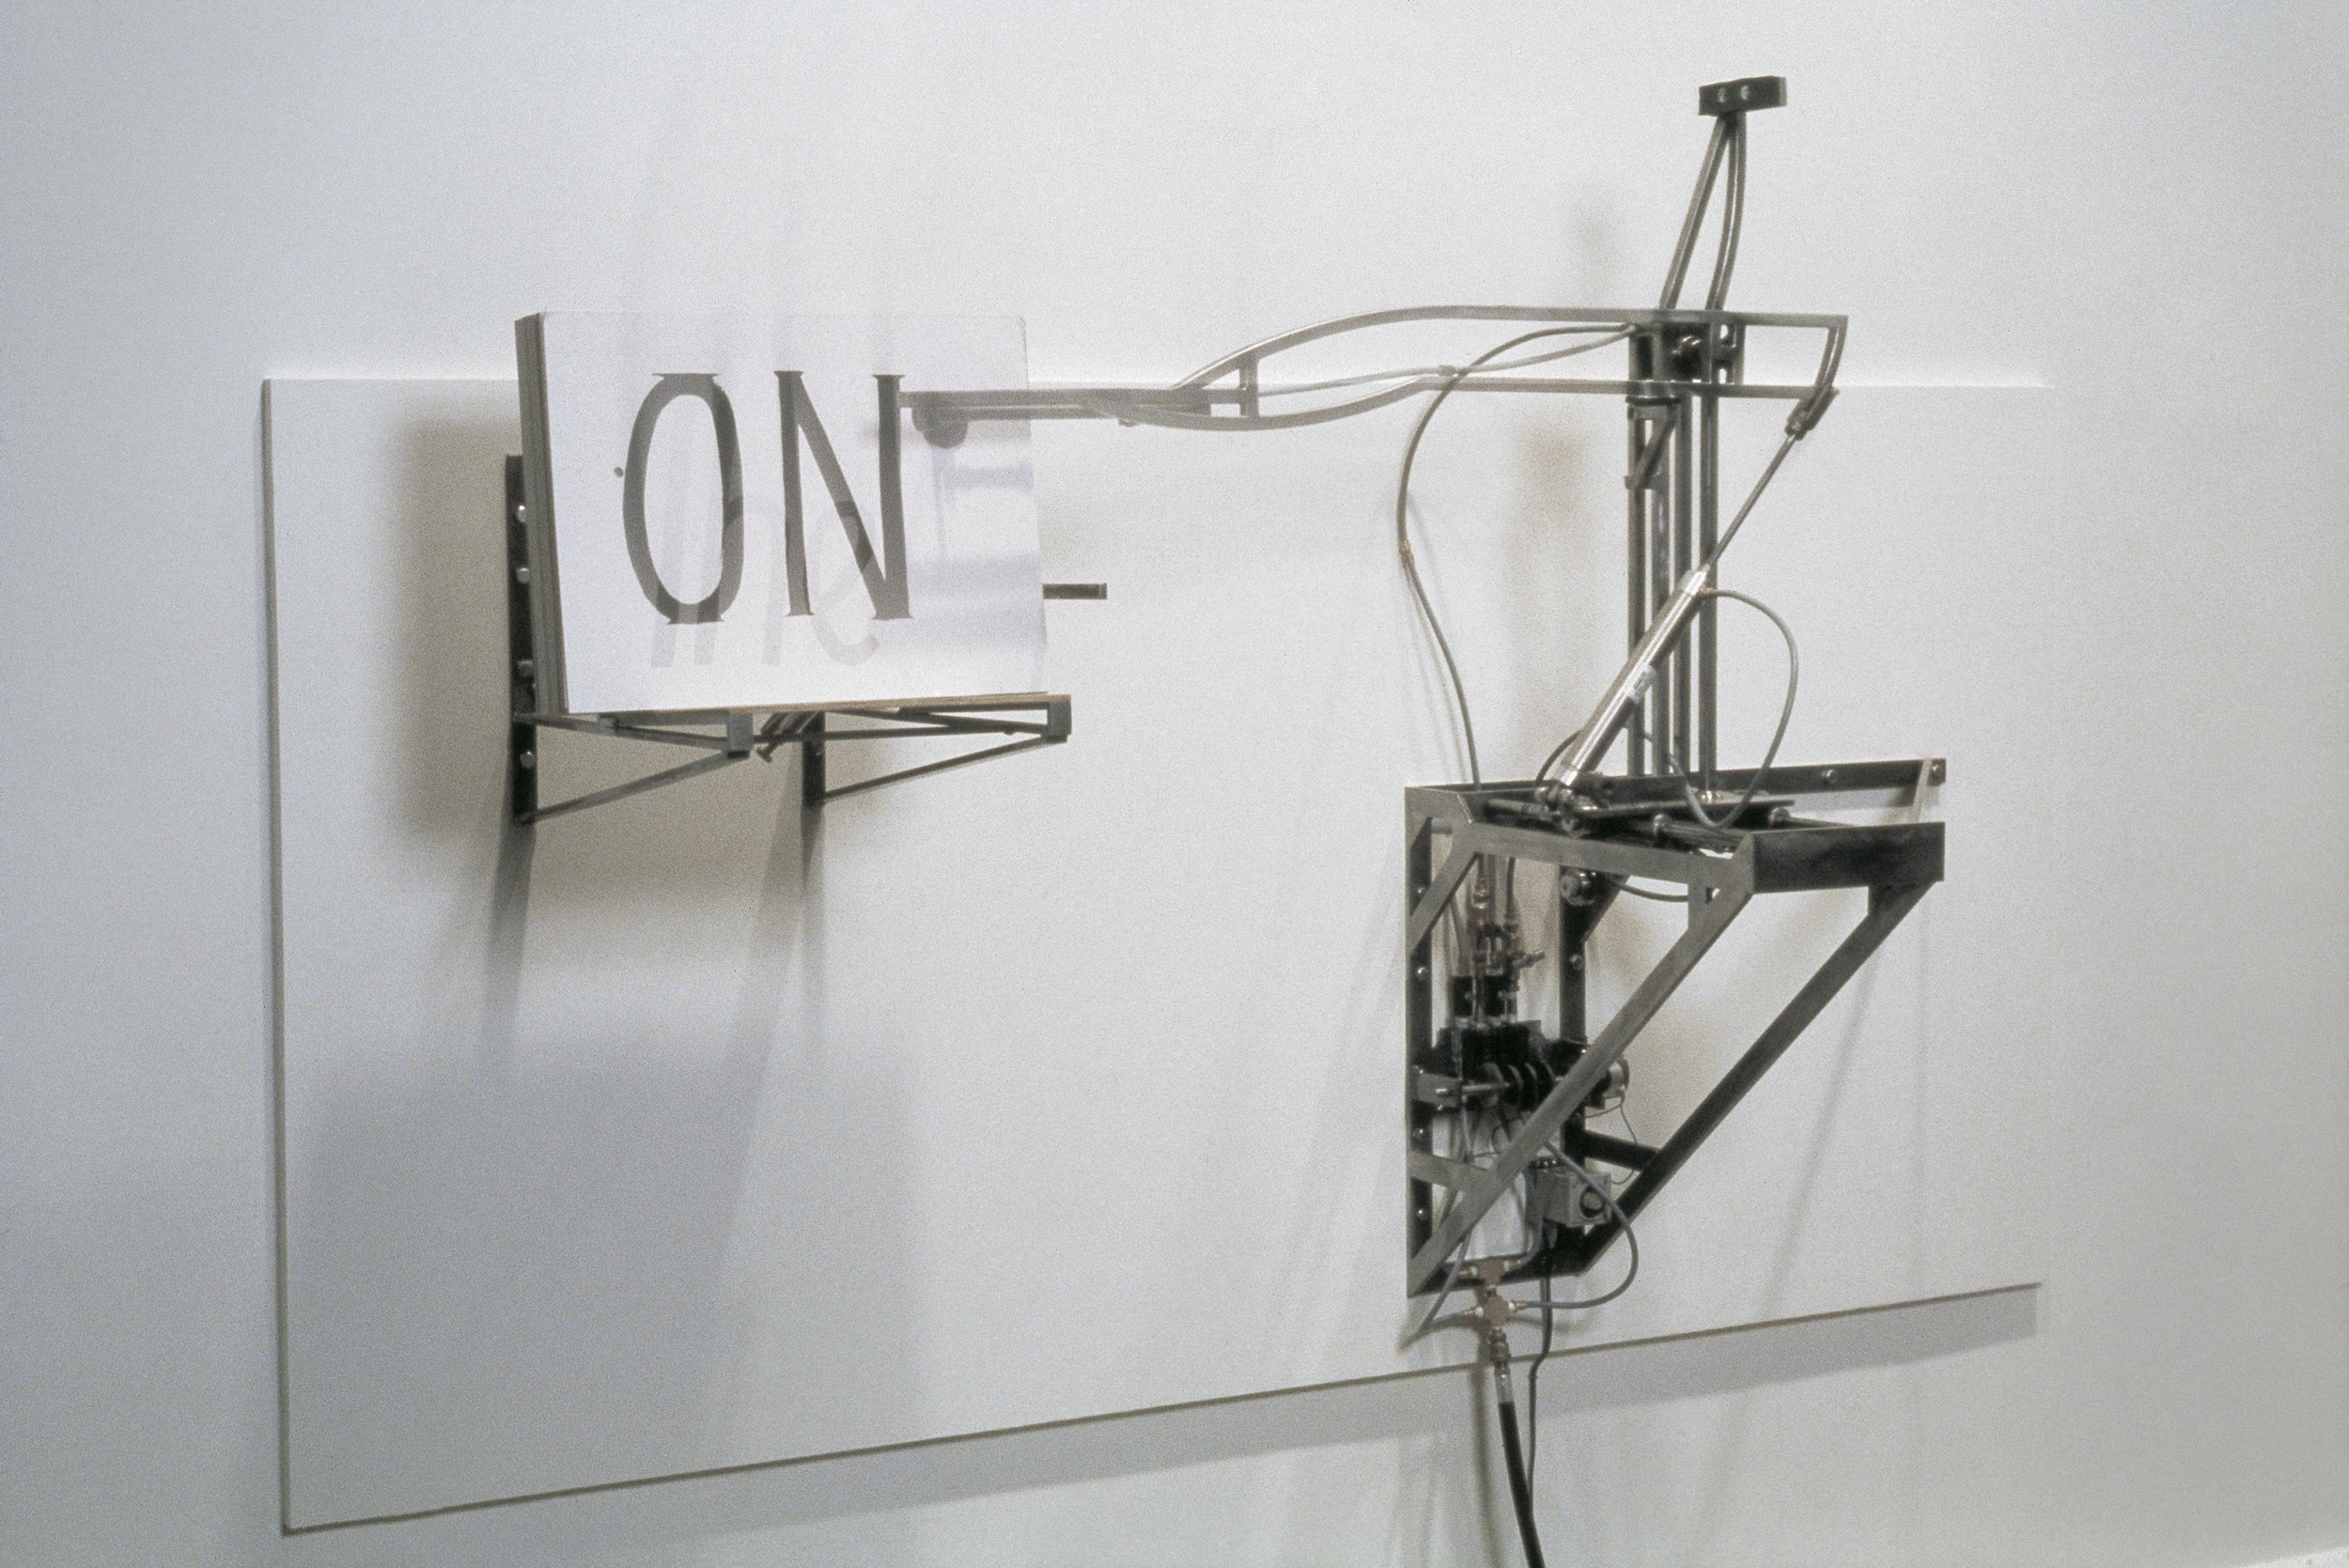  Placard Flinger, 1995, Steel, pneumatics, rubber, motor, and ink on cardboard, 48 x 60 x 24 inches 